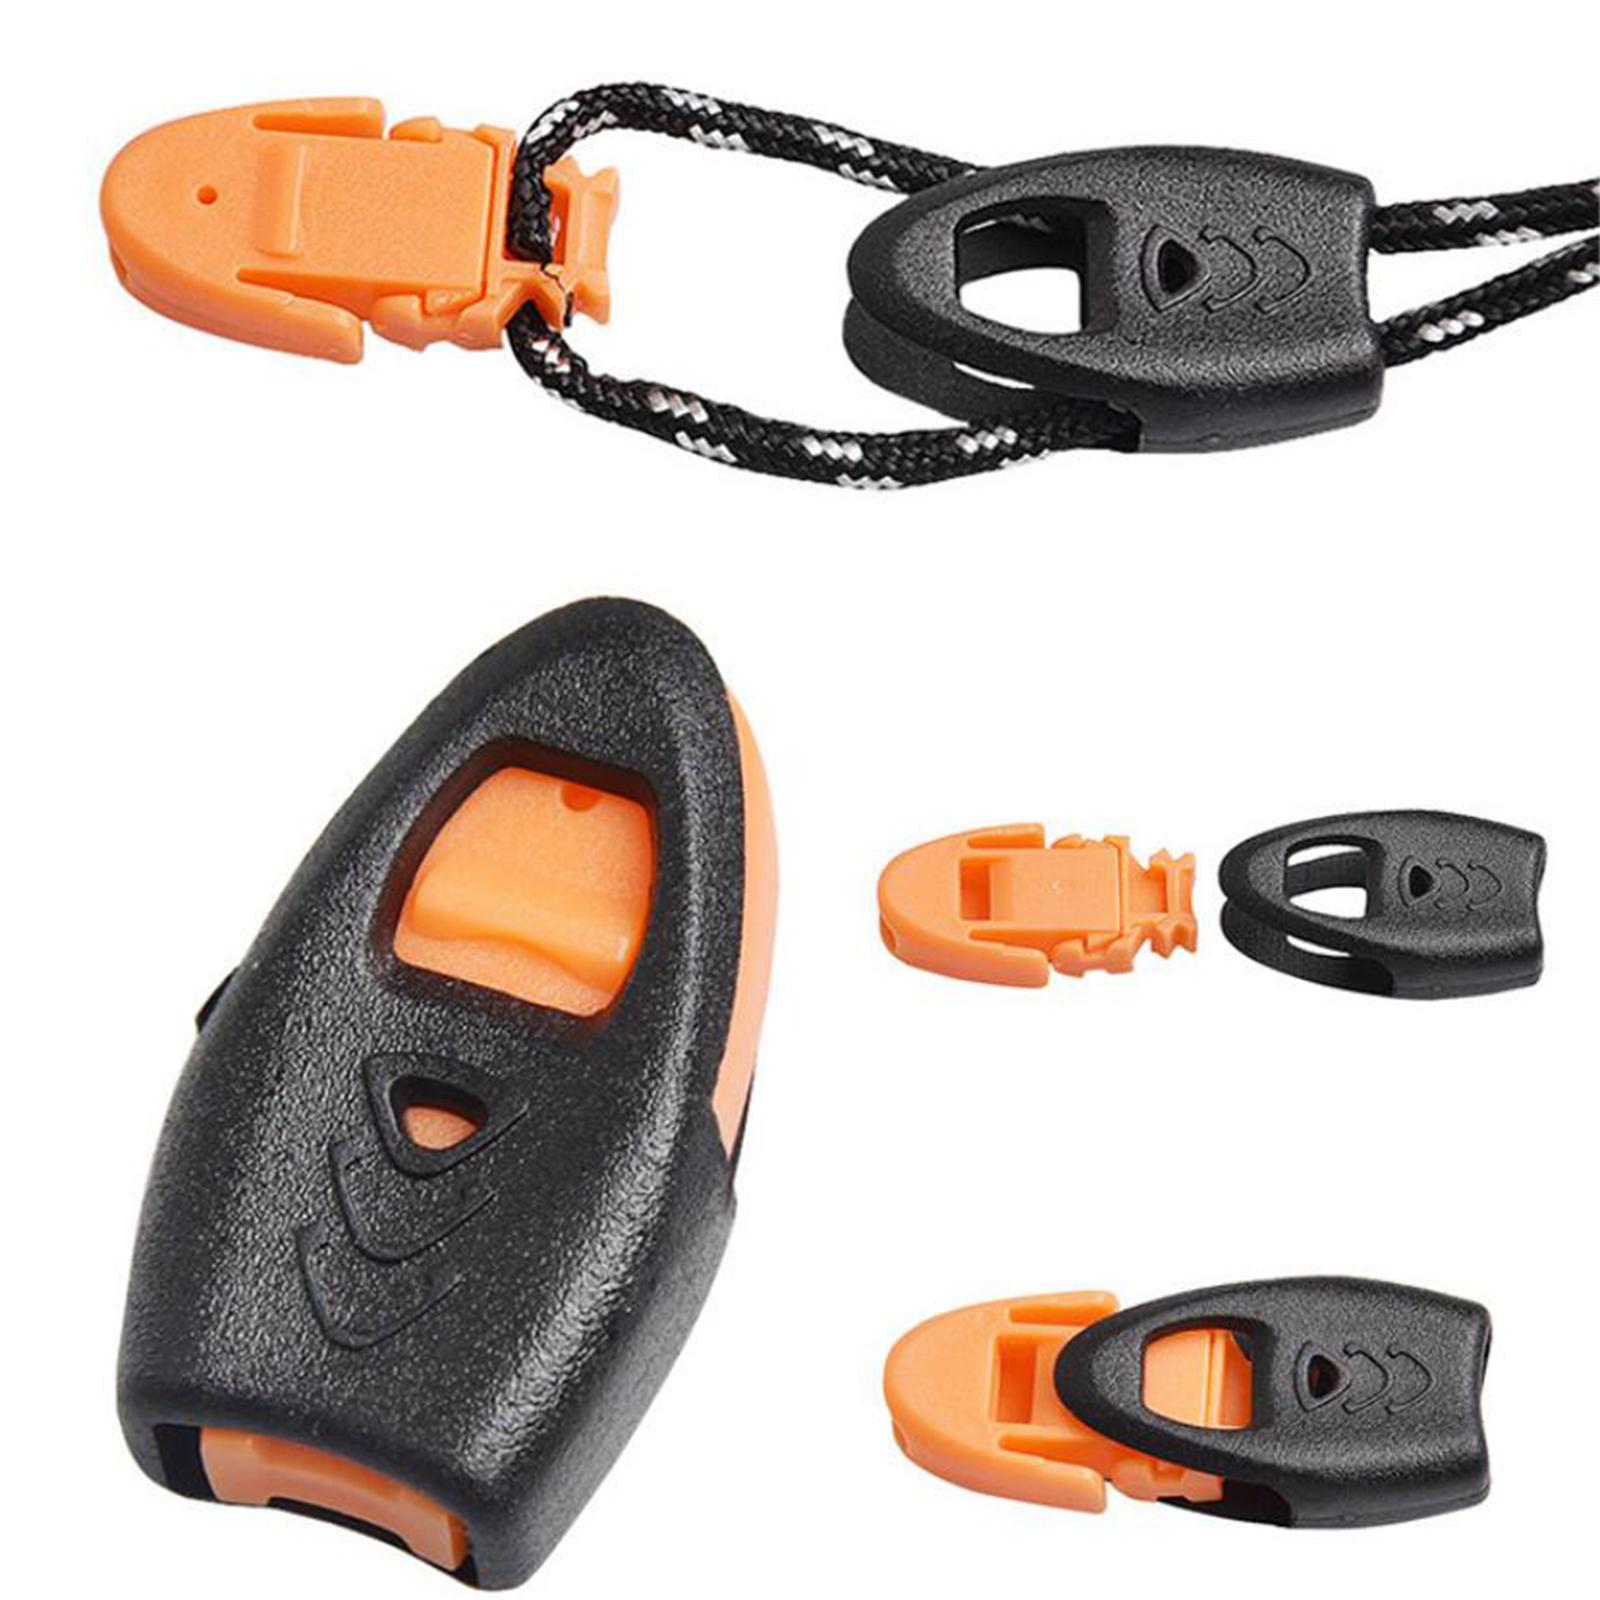 Emergency Survival Whistles, Referee Whistle, Sports Whistle with Lanyard for Outdoor Camping Boating